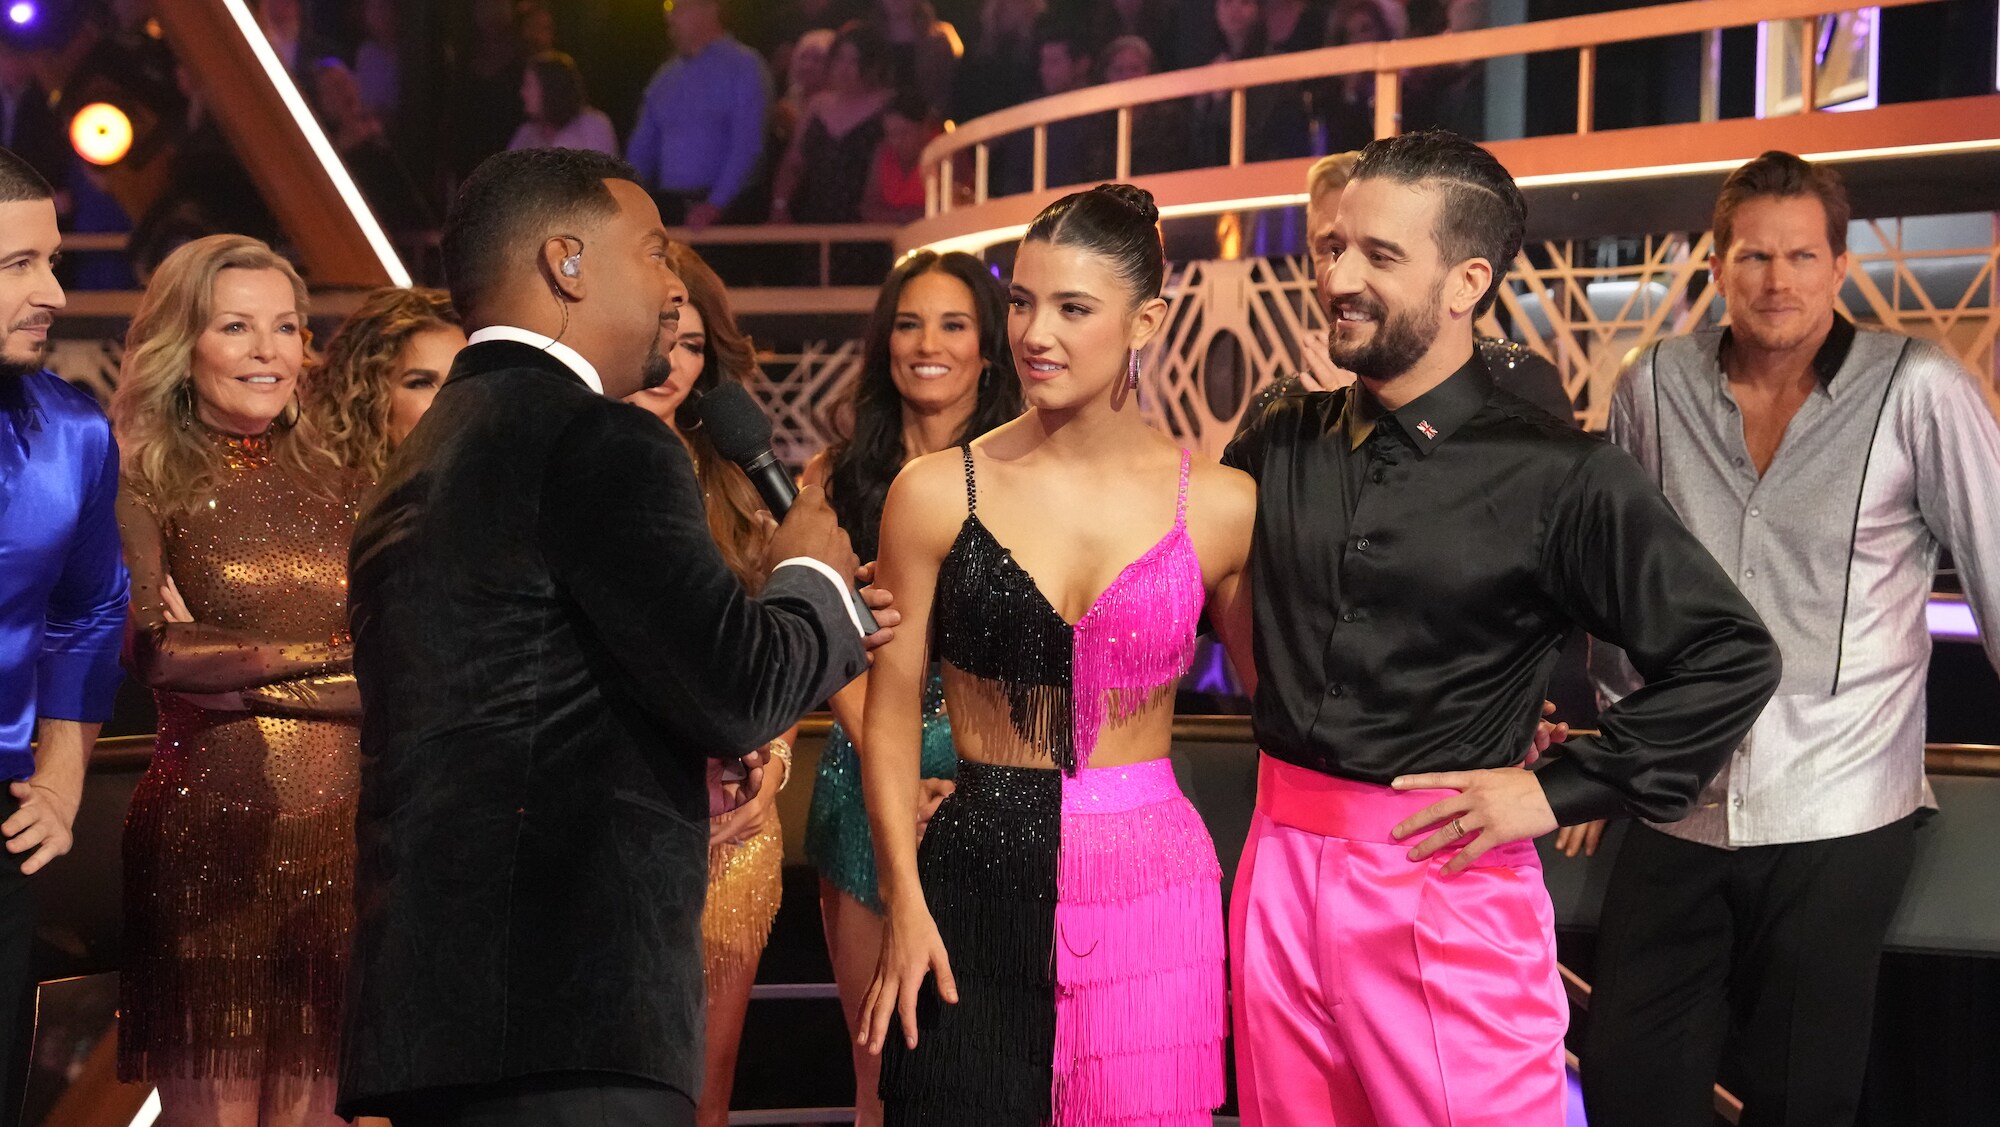 DANCING WITH THE STARS - “Finale” – The four finalists perform their final two routines in hopes of winning the mirrorball trophy. Each couple will perform a redemption dance and an unforgettable freestyle routine. A new episode of “Dancing with the Stars” will stream live MONDAY, NOV. 21 (8:00pm ET / 5:00pm PT), on Disney+. (ABC/Eric McCandless) ALFONSO RIBEIRO, CHARLI D’AMELIO, MARK BALLAS